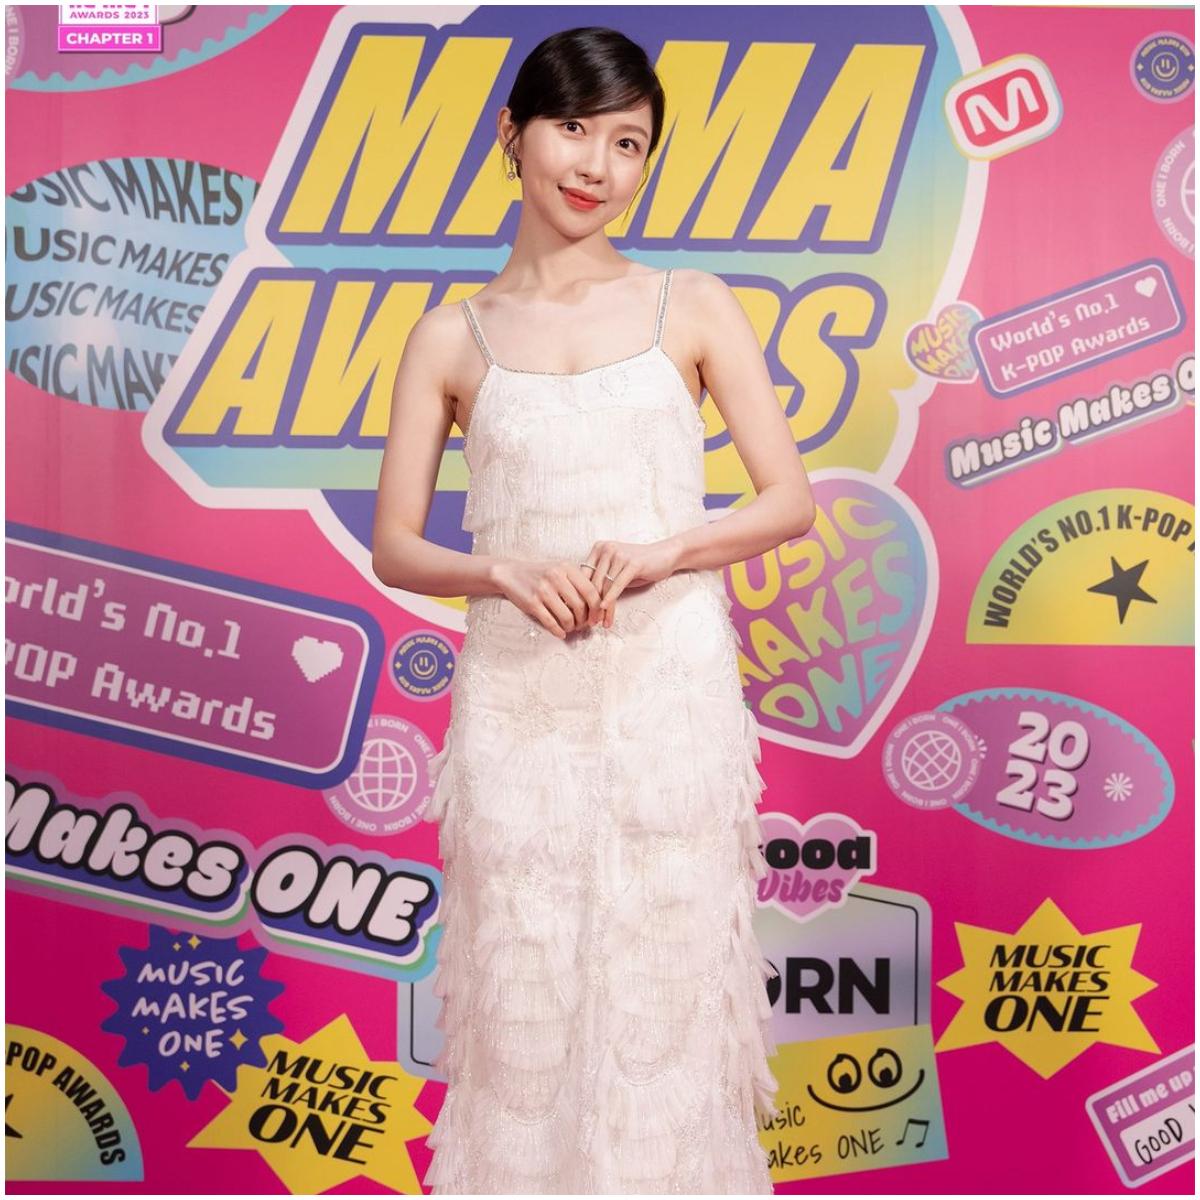 MAMA 2023 was attended by several K-drama stars, including actress Joo Hyun-young. She gained recognition for her appearances in the comedy-variety show SNL Korea in 2021 and the television series Extraordinary Attorney Woo in 2022